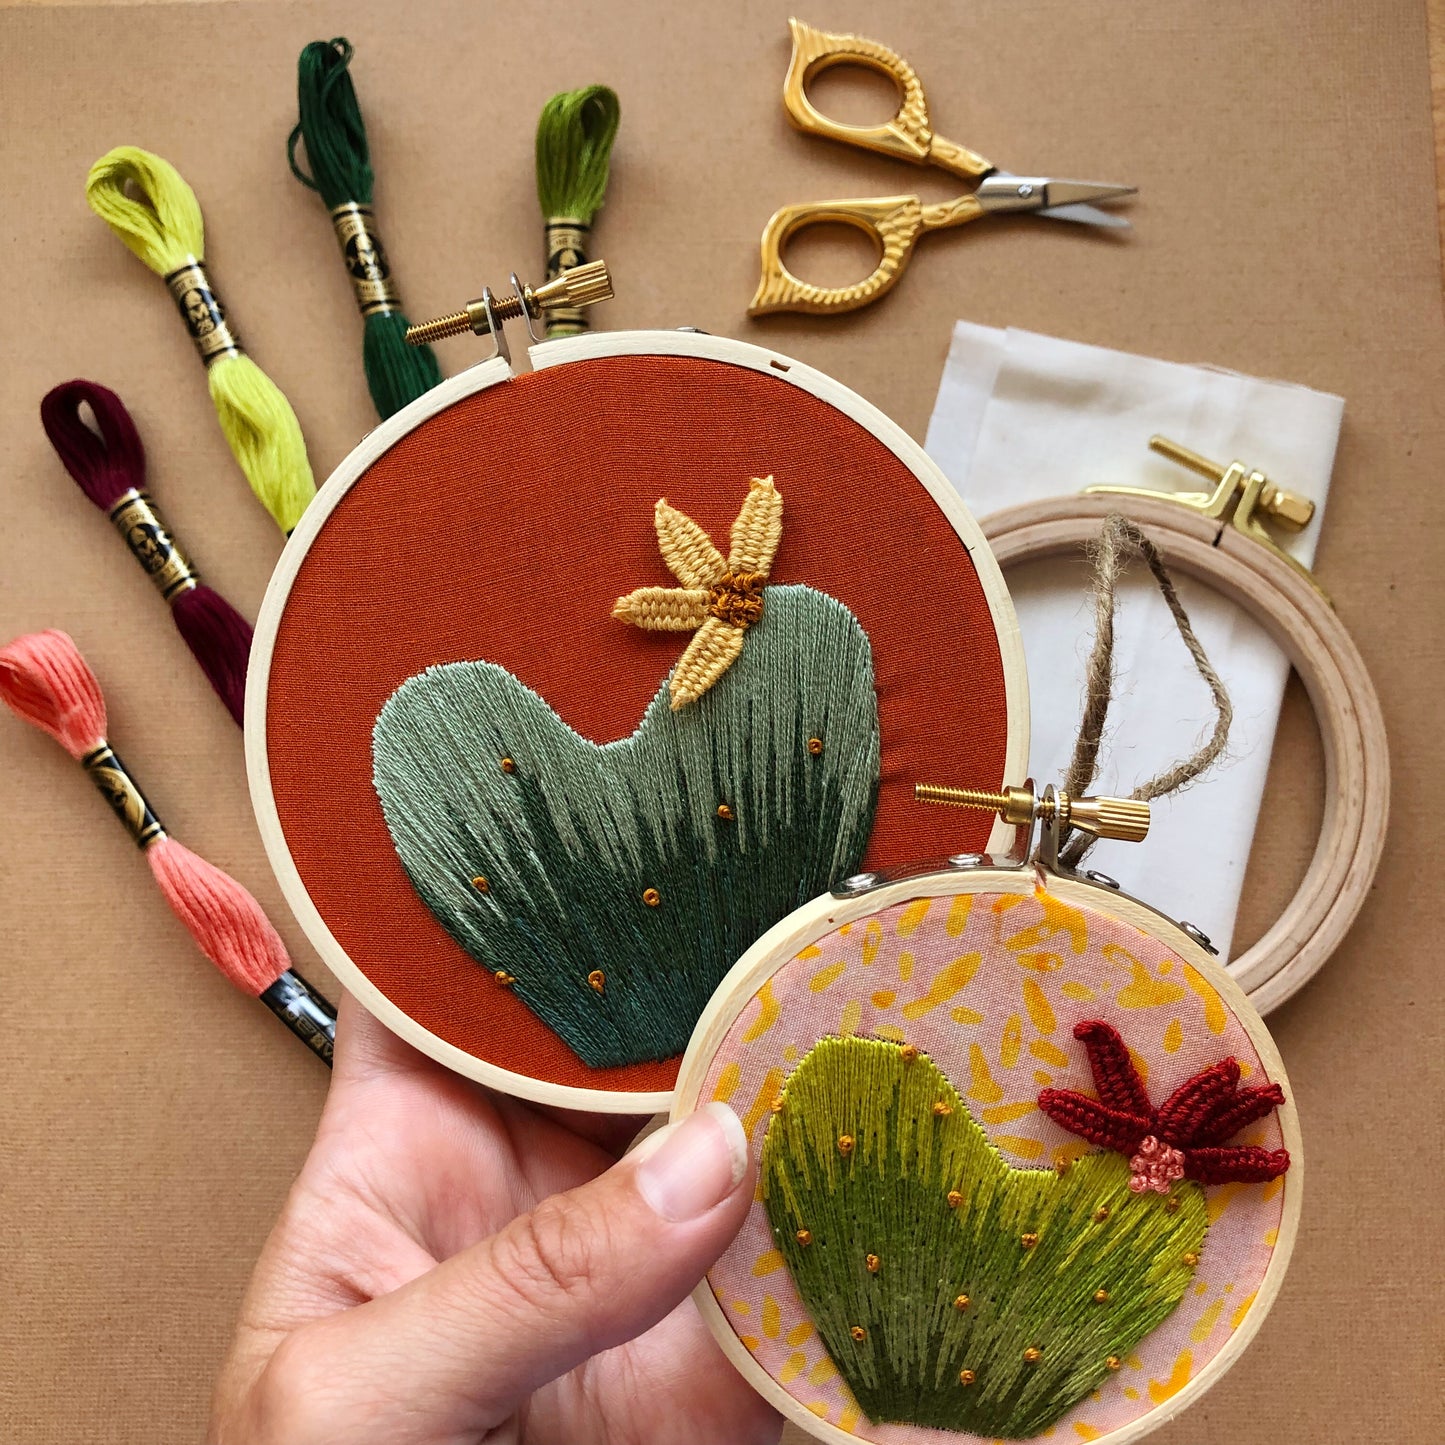 Heart Cactus with 3D Flower - Intermediate DIY Embroidery Kit